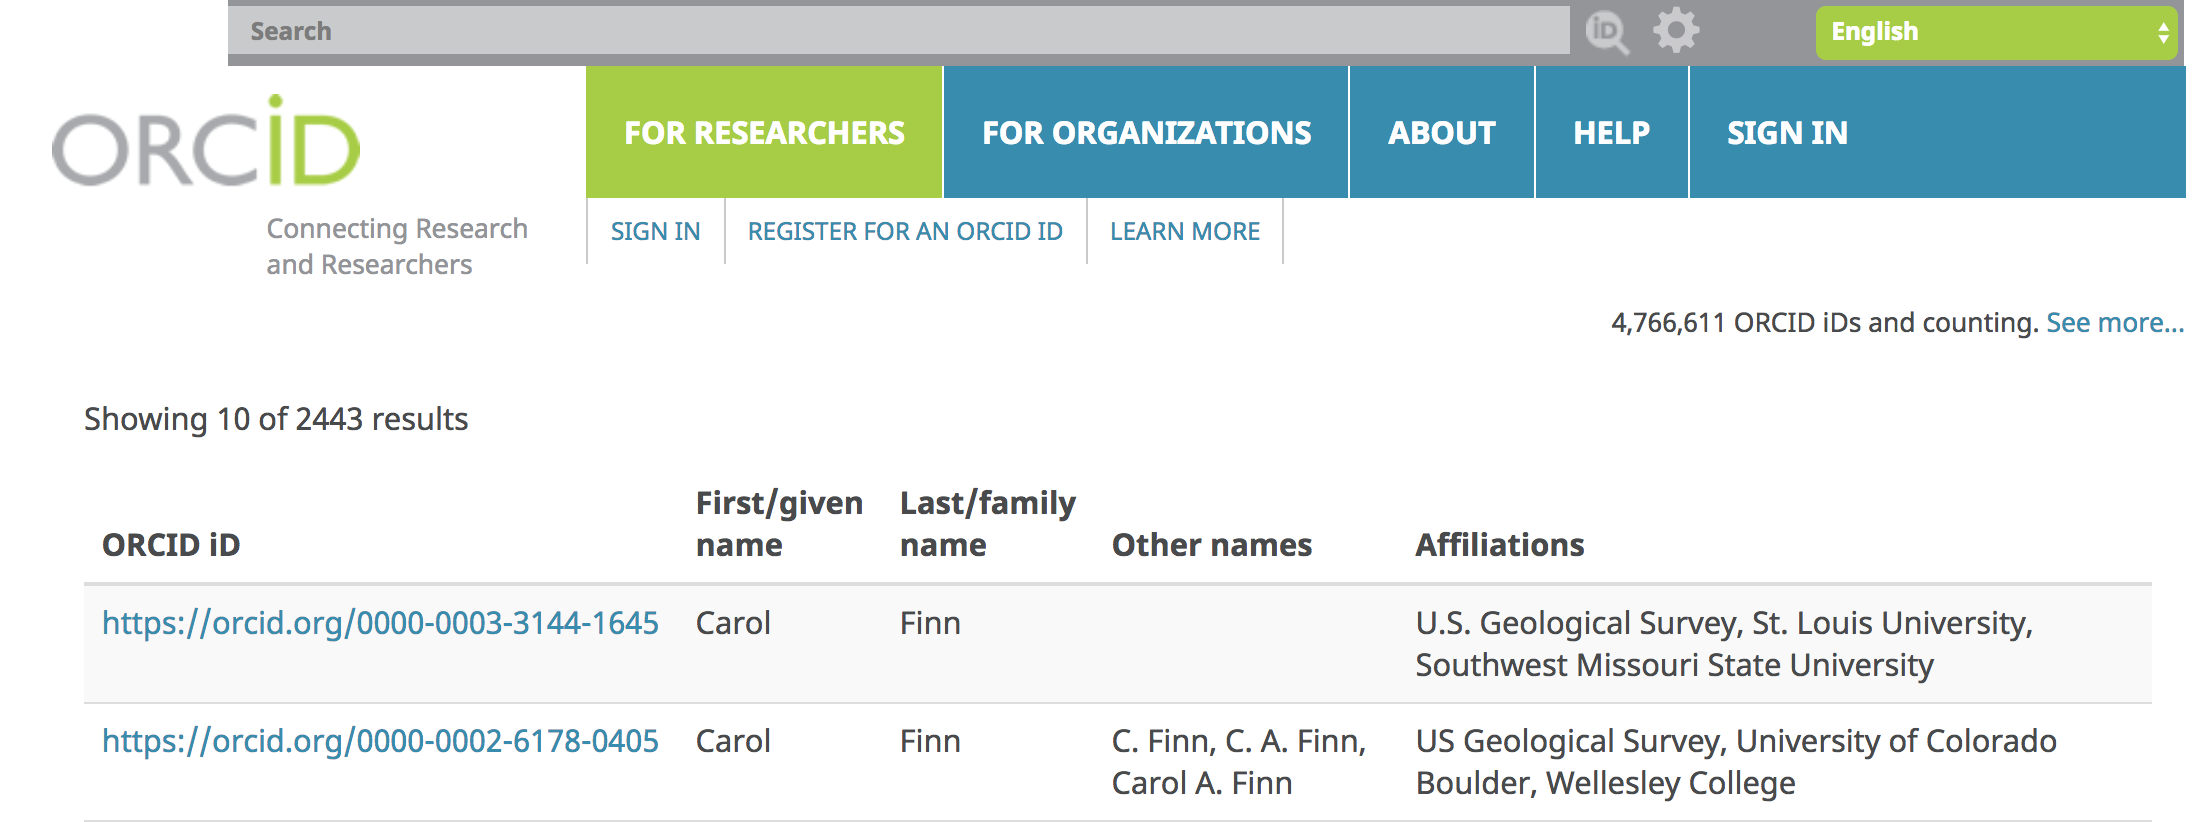 Example ORCiD data for two researchers